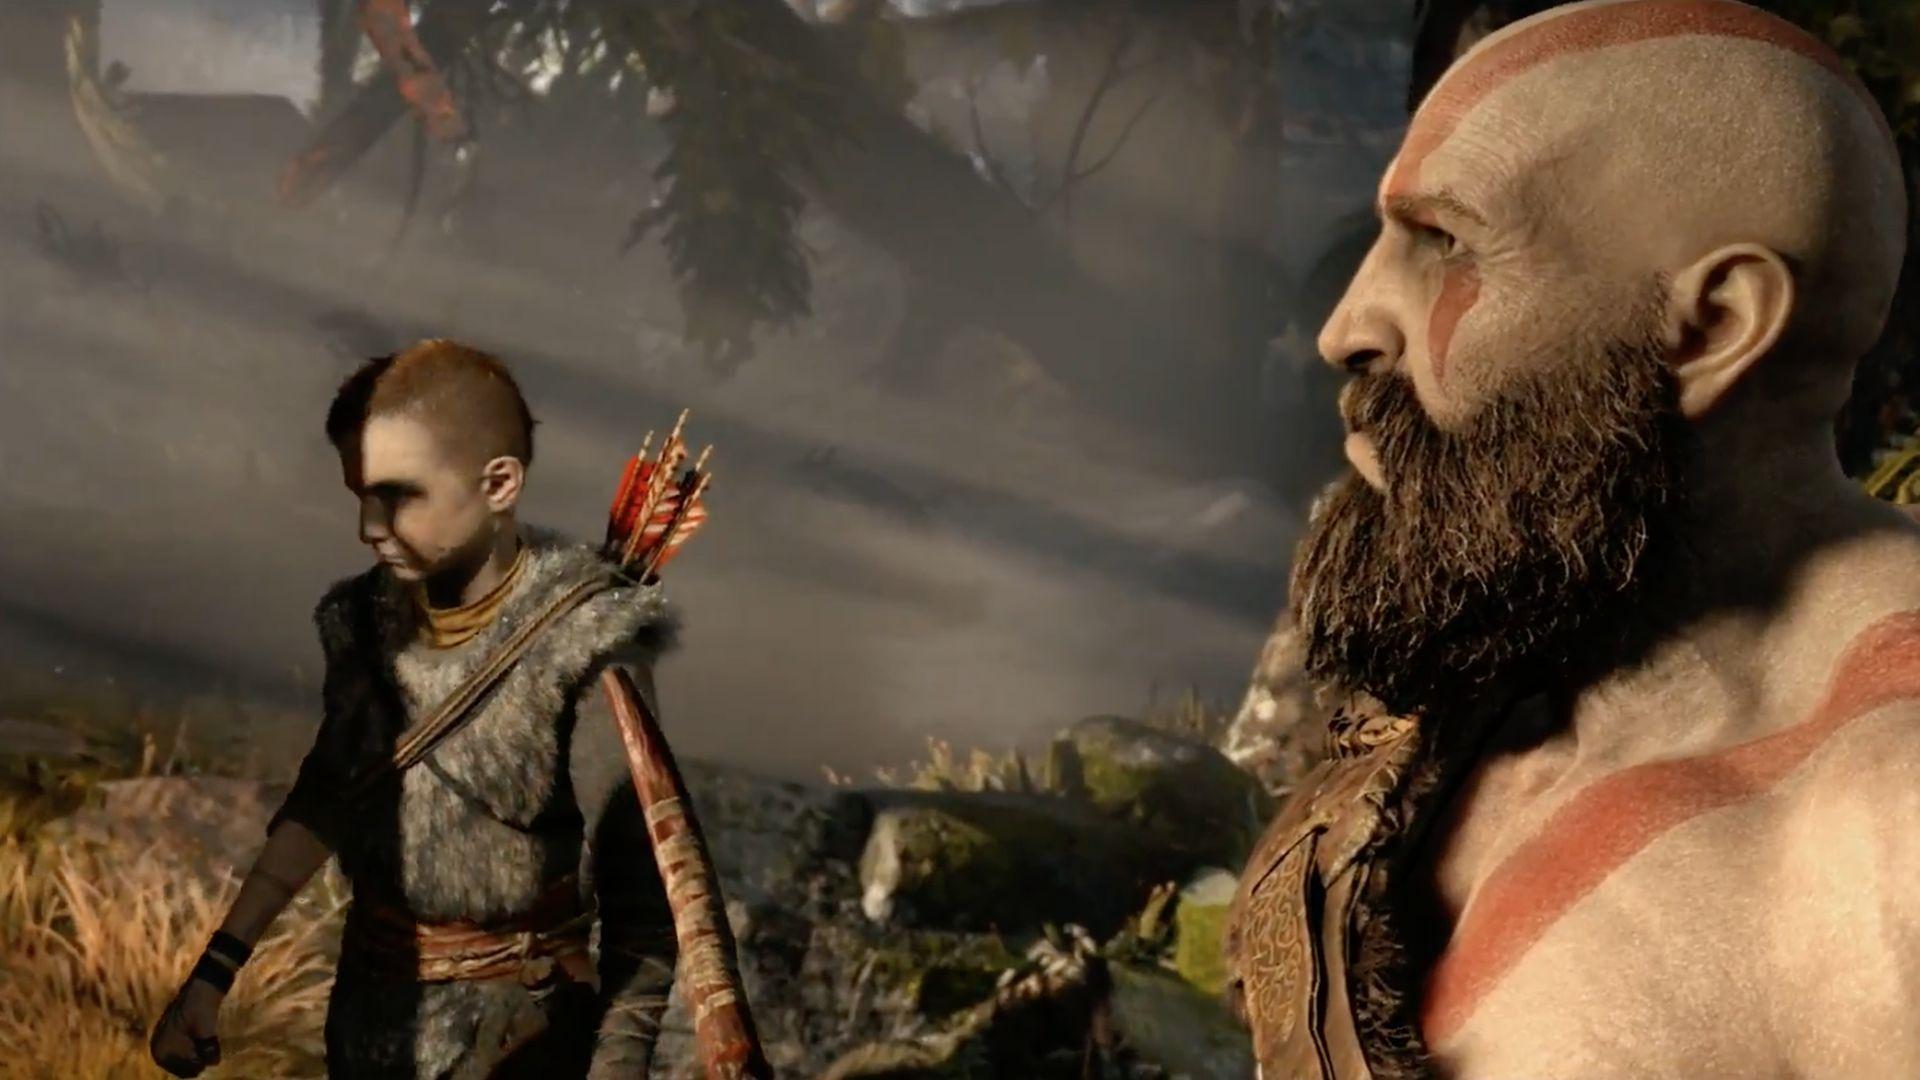 Leaked God of War Footage Gives The Best Look Yet At The Game's